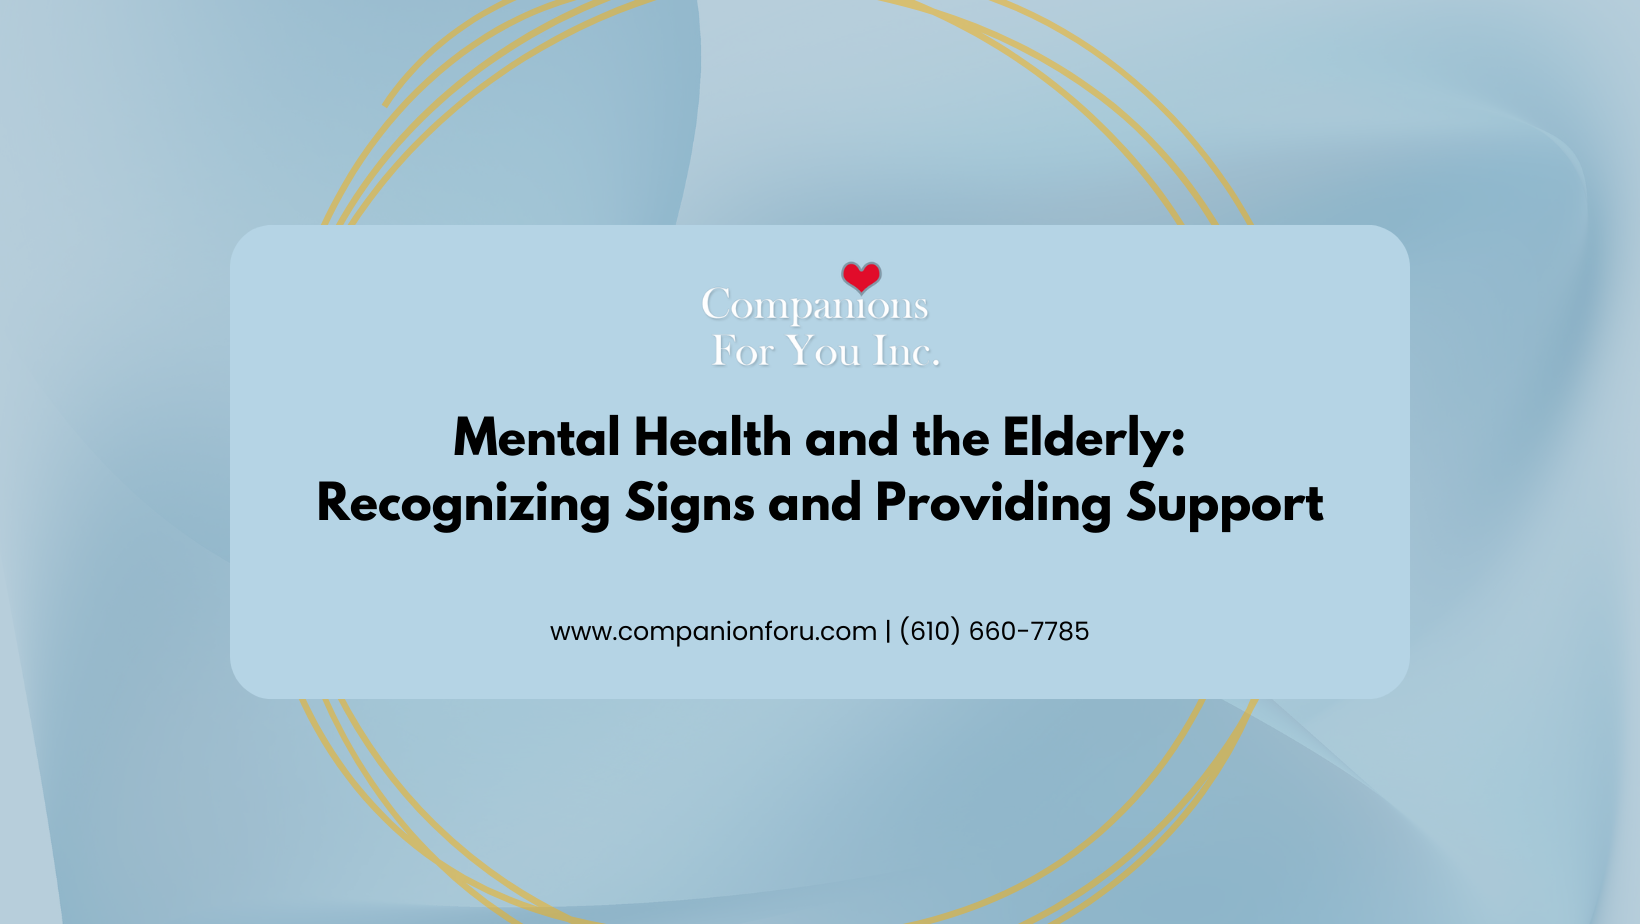 Mental Health and the Elderly: Recognizing Signs and Providing Support